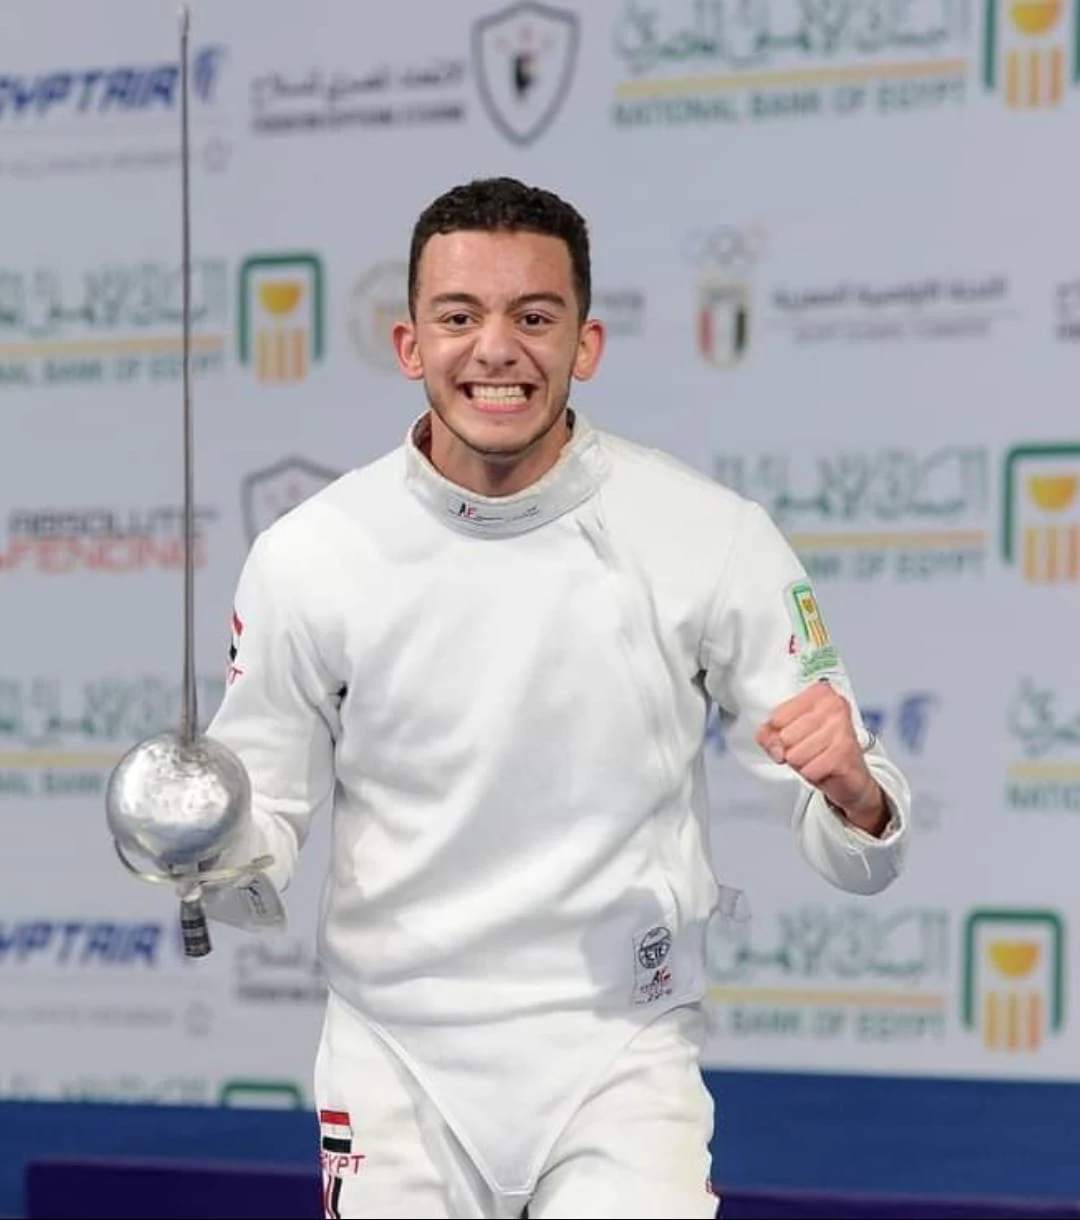 Our Olympic champion Mohamed El Sayed, son of the Academy, defeats the champion of Italy 15-12 and qualifies for the quarterfinals of the Grand Prix of fencing in Colombia